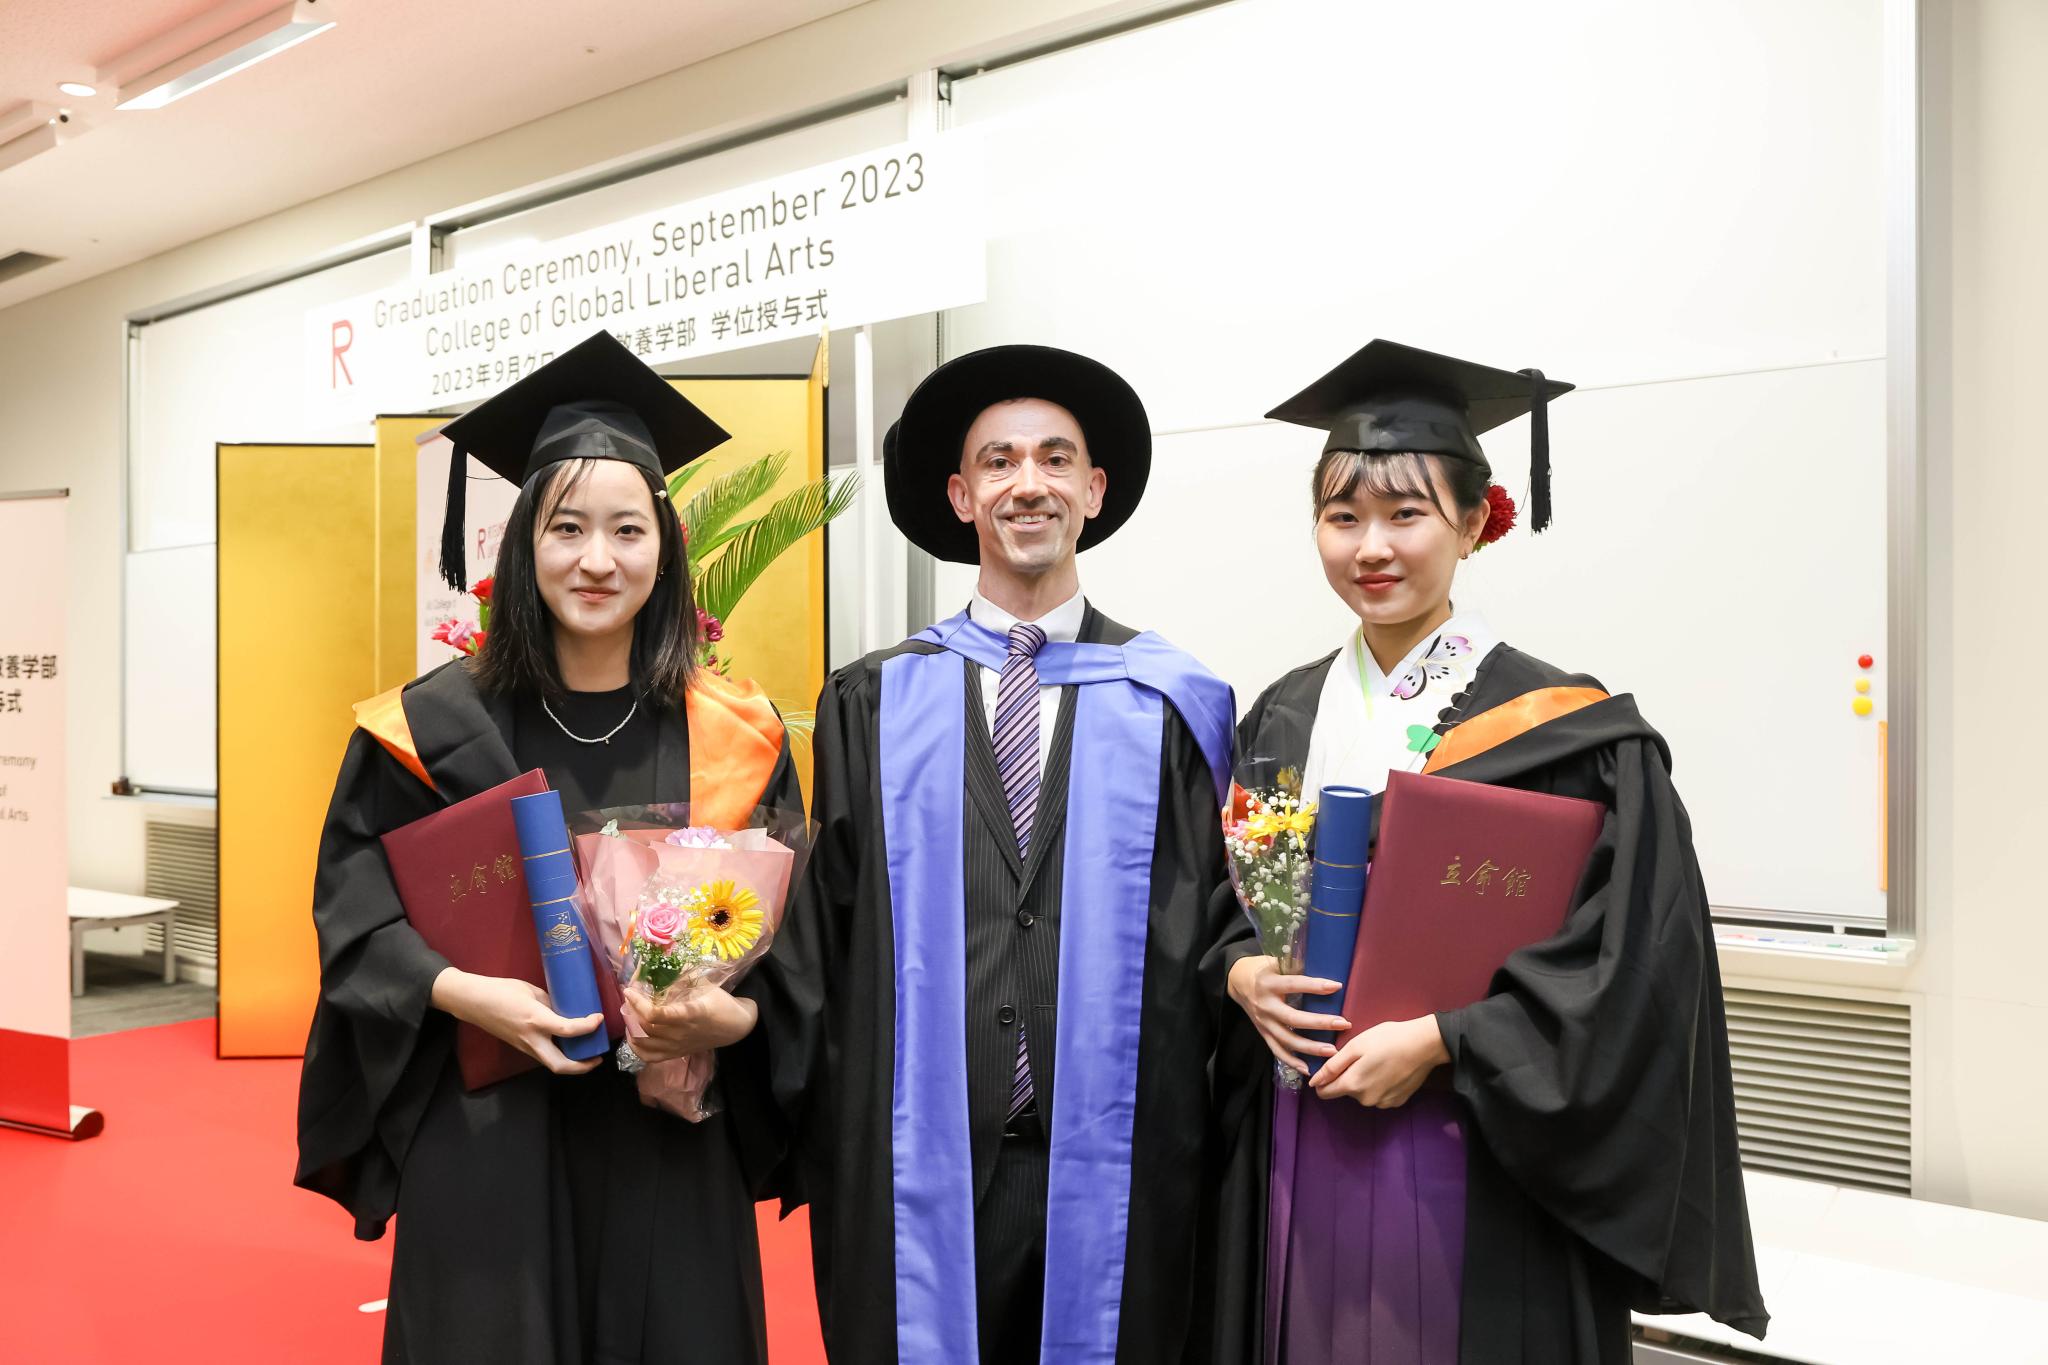 Three people standing in graduation robes and hats